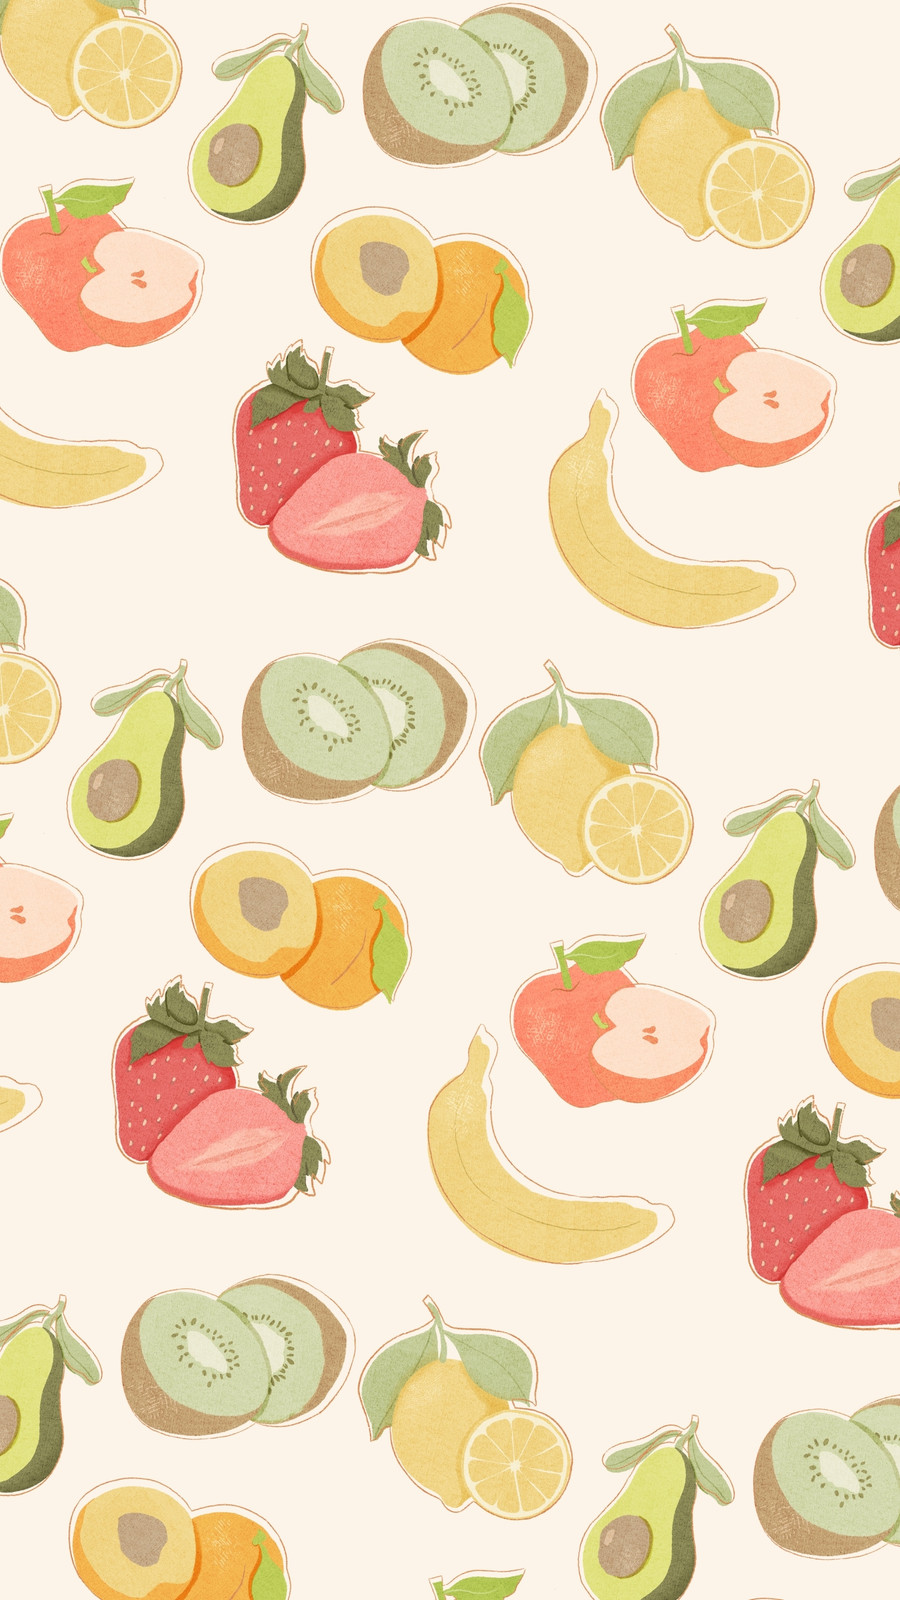 Free and customizable fruit templates